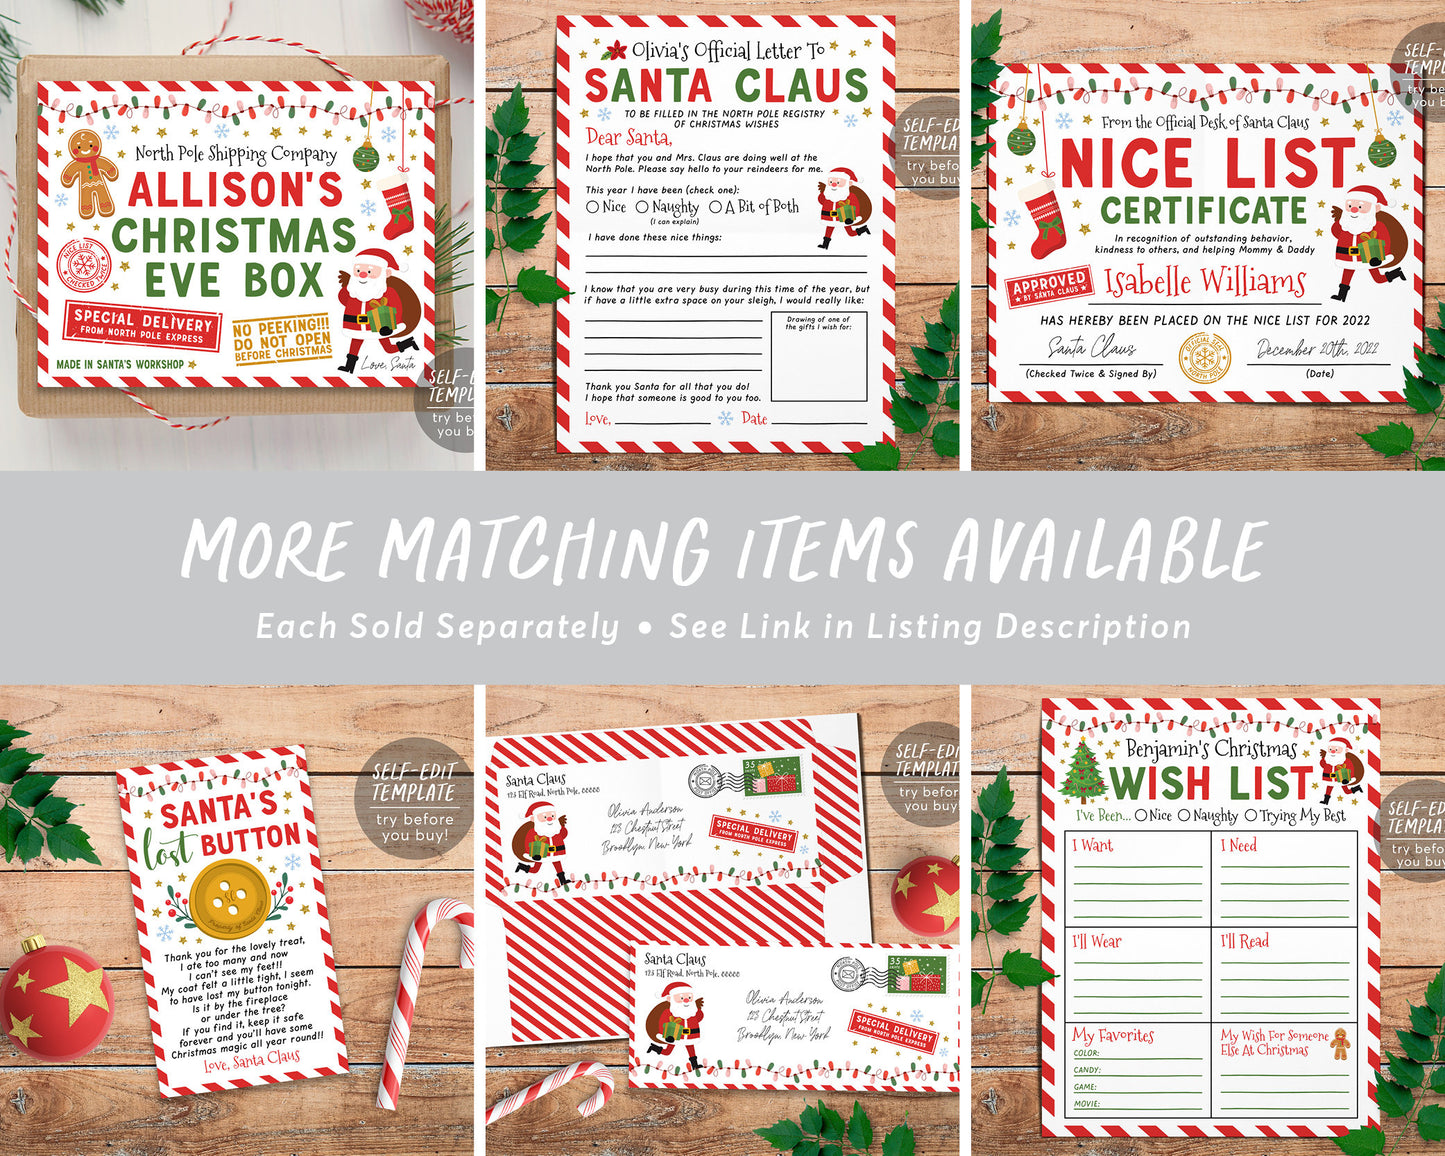 We've Been Socked Christmas Office Party Game Editable Template, I've Been Socked, Christmas Holiday Stocking Exchange Sign Instructions